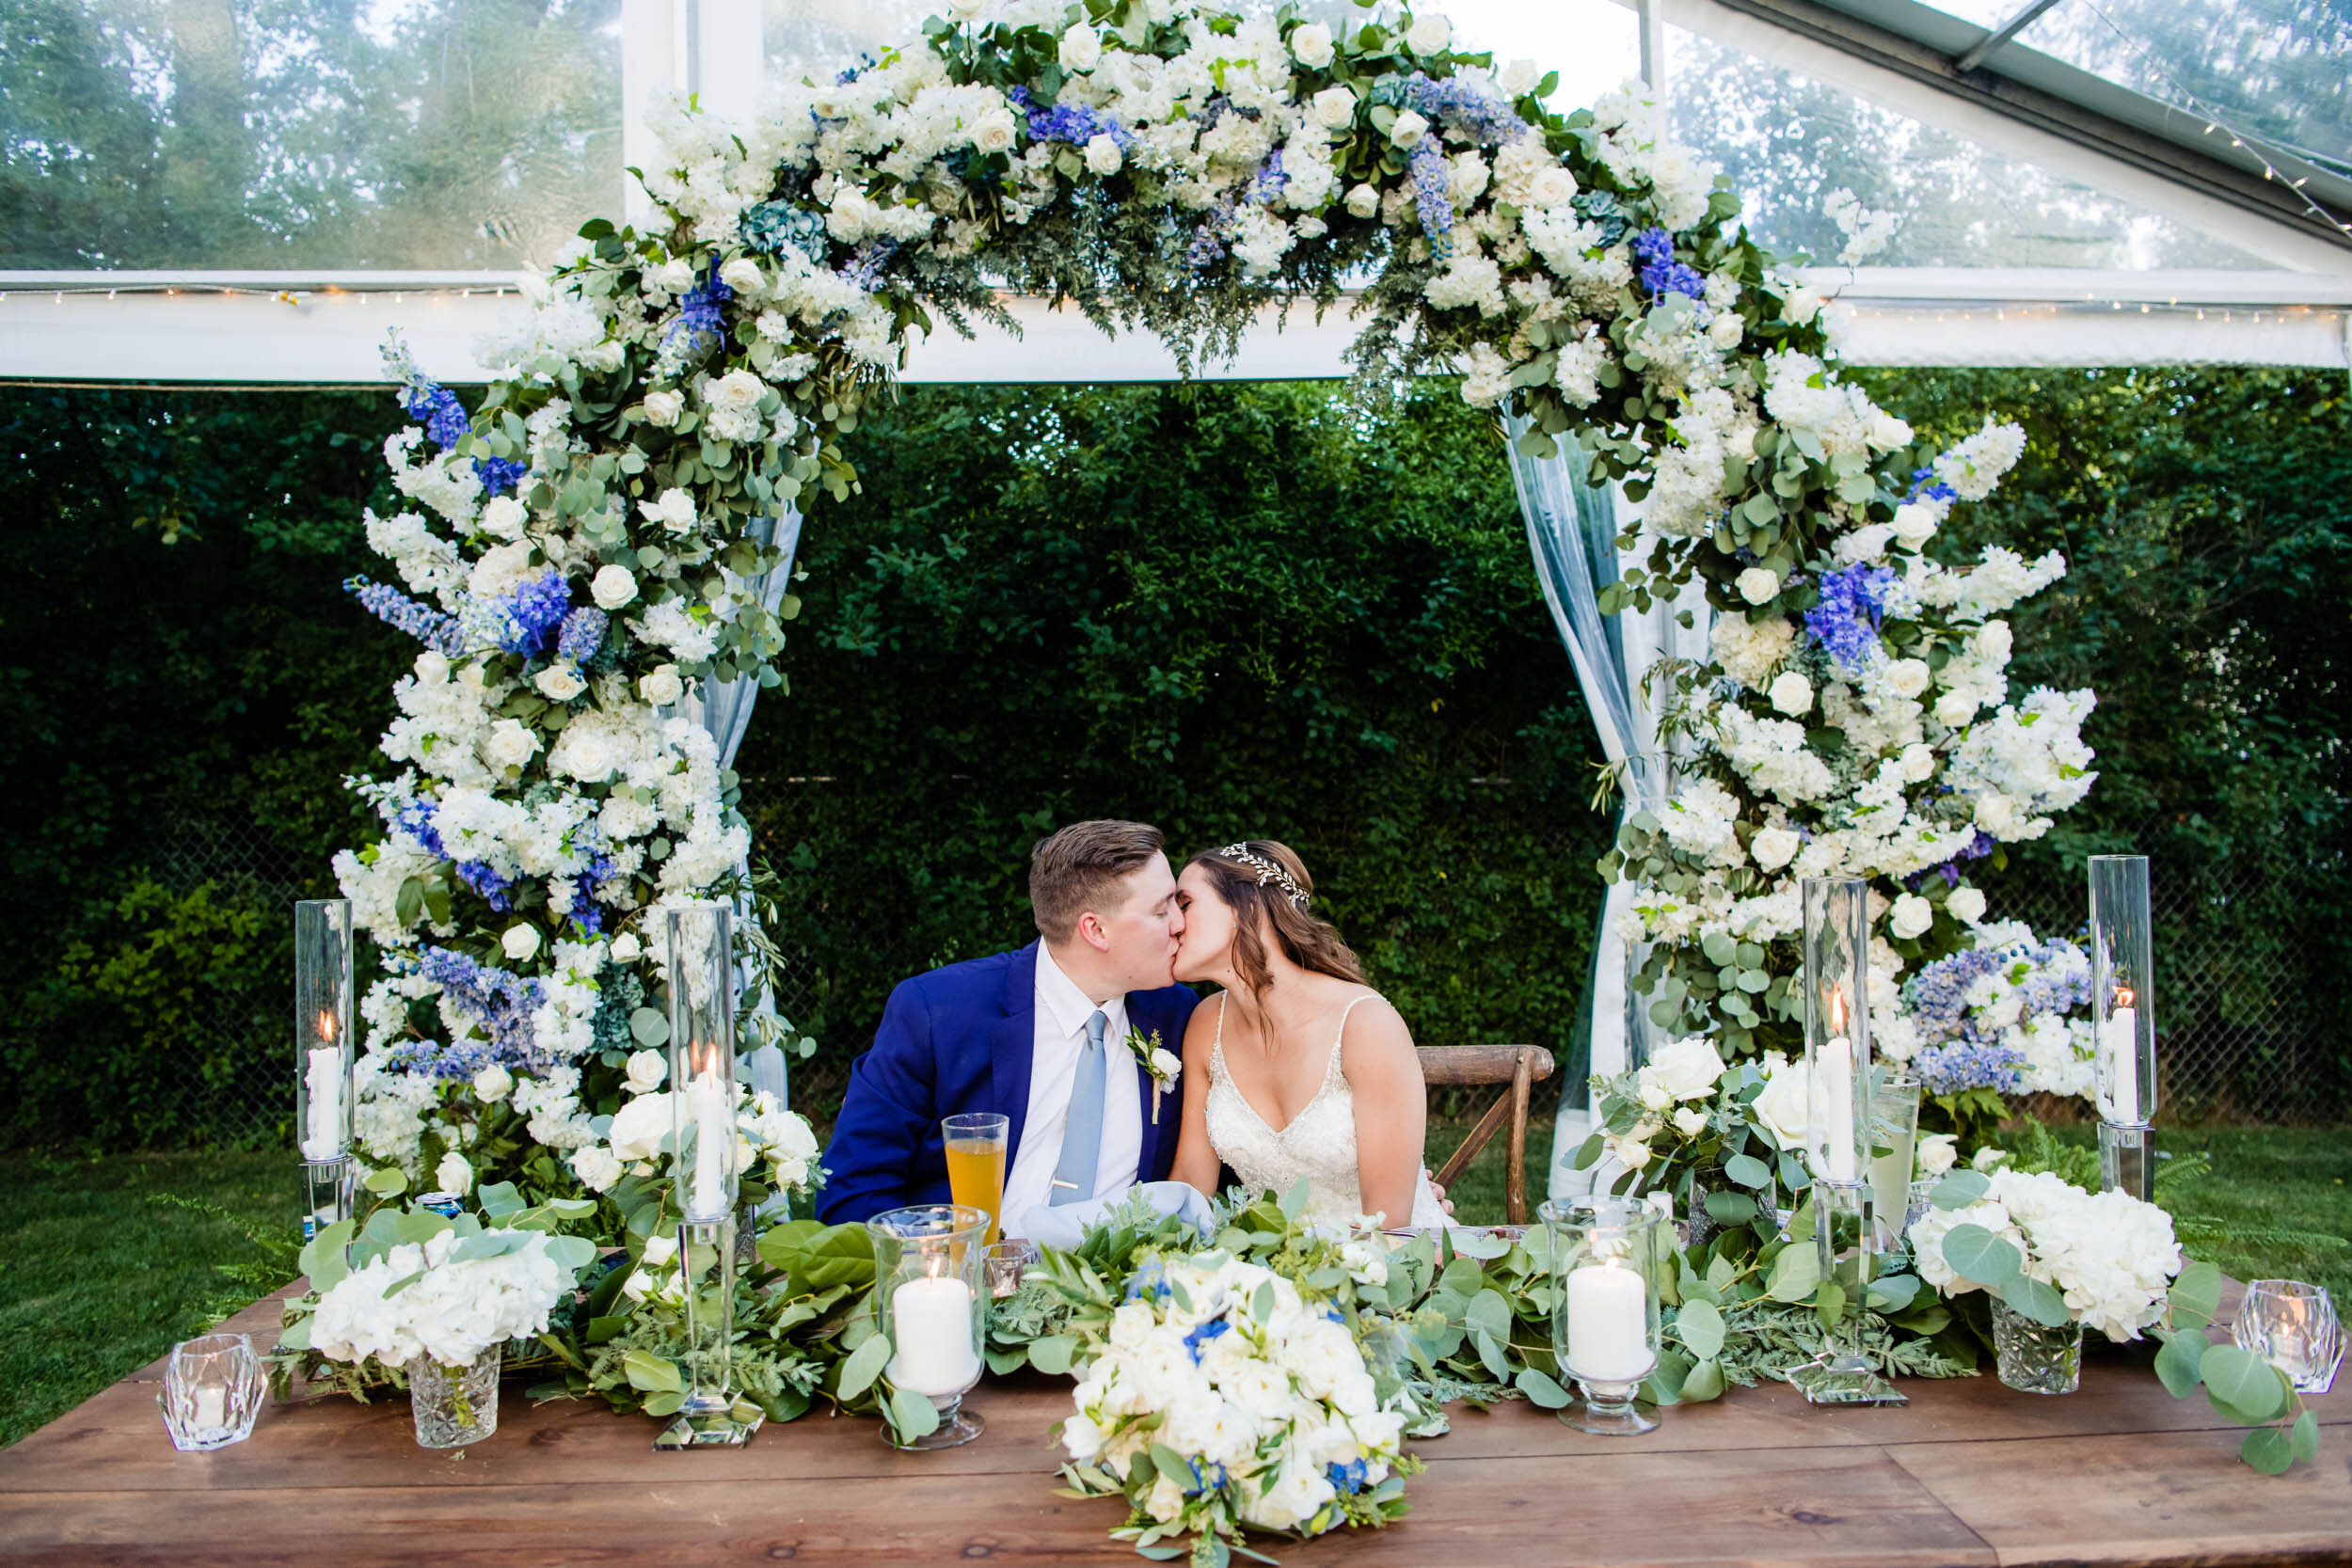 Bride and groom kiss at the headtable:  Chicago backyard wedding photographed by J. Brown Photography.